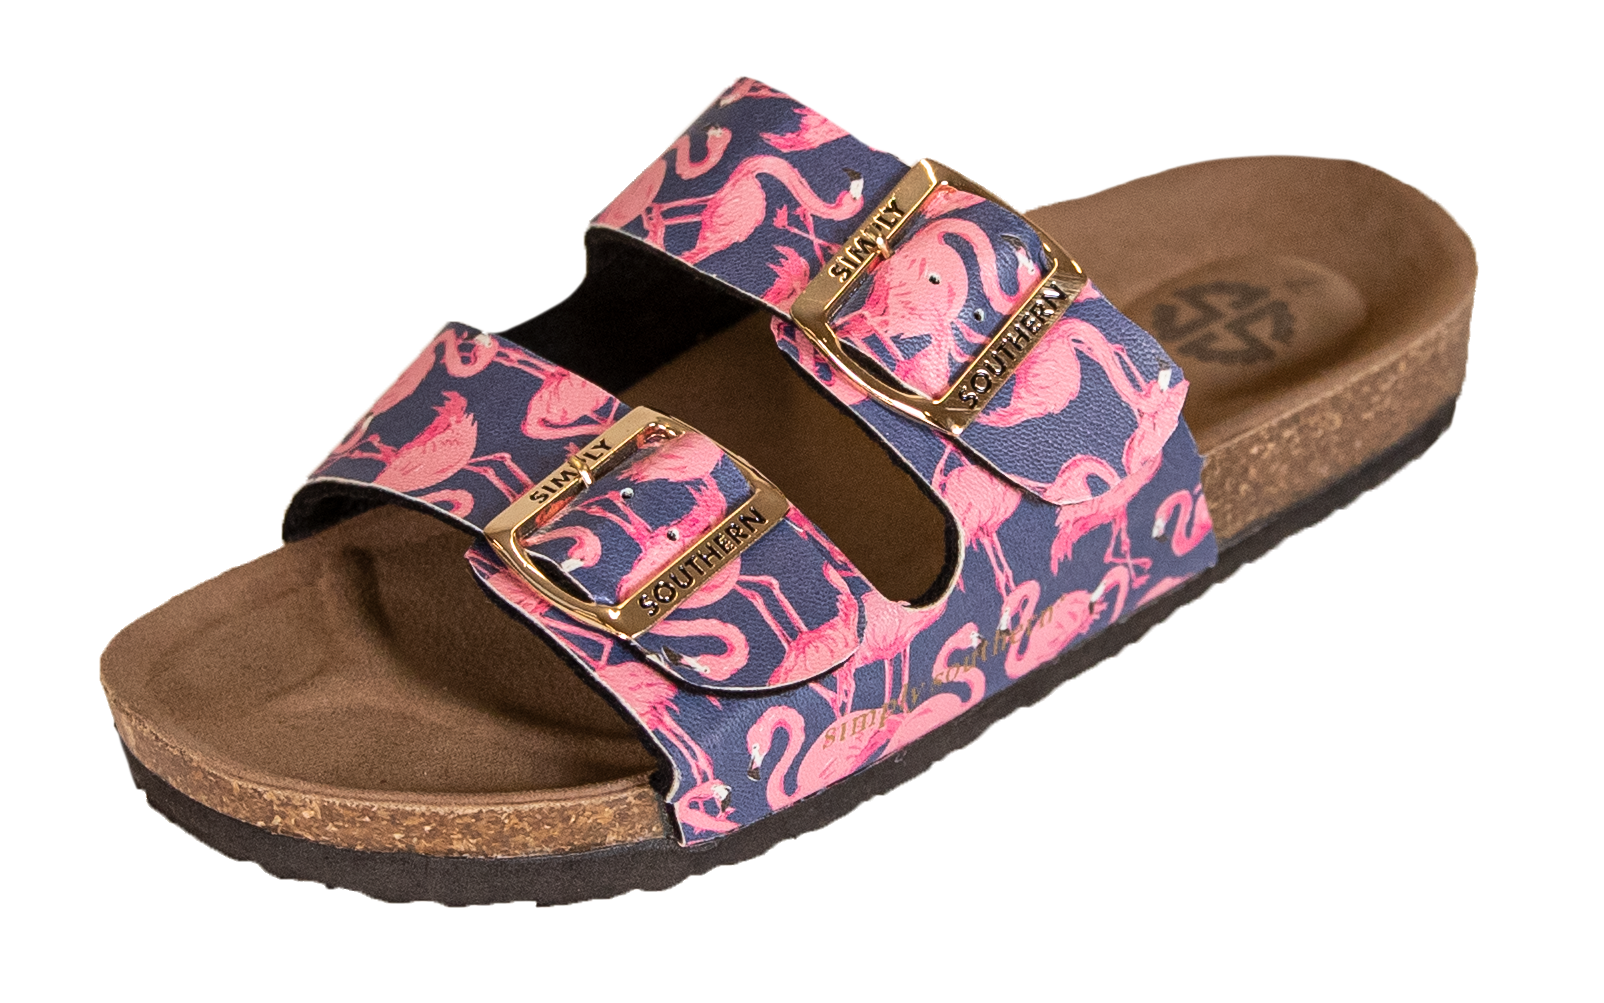 simply southern turtle sandals